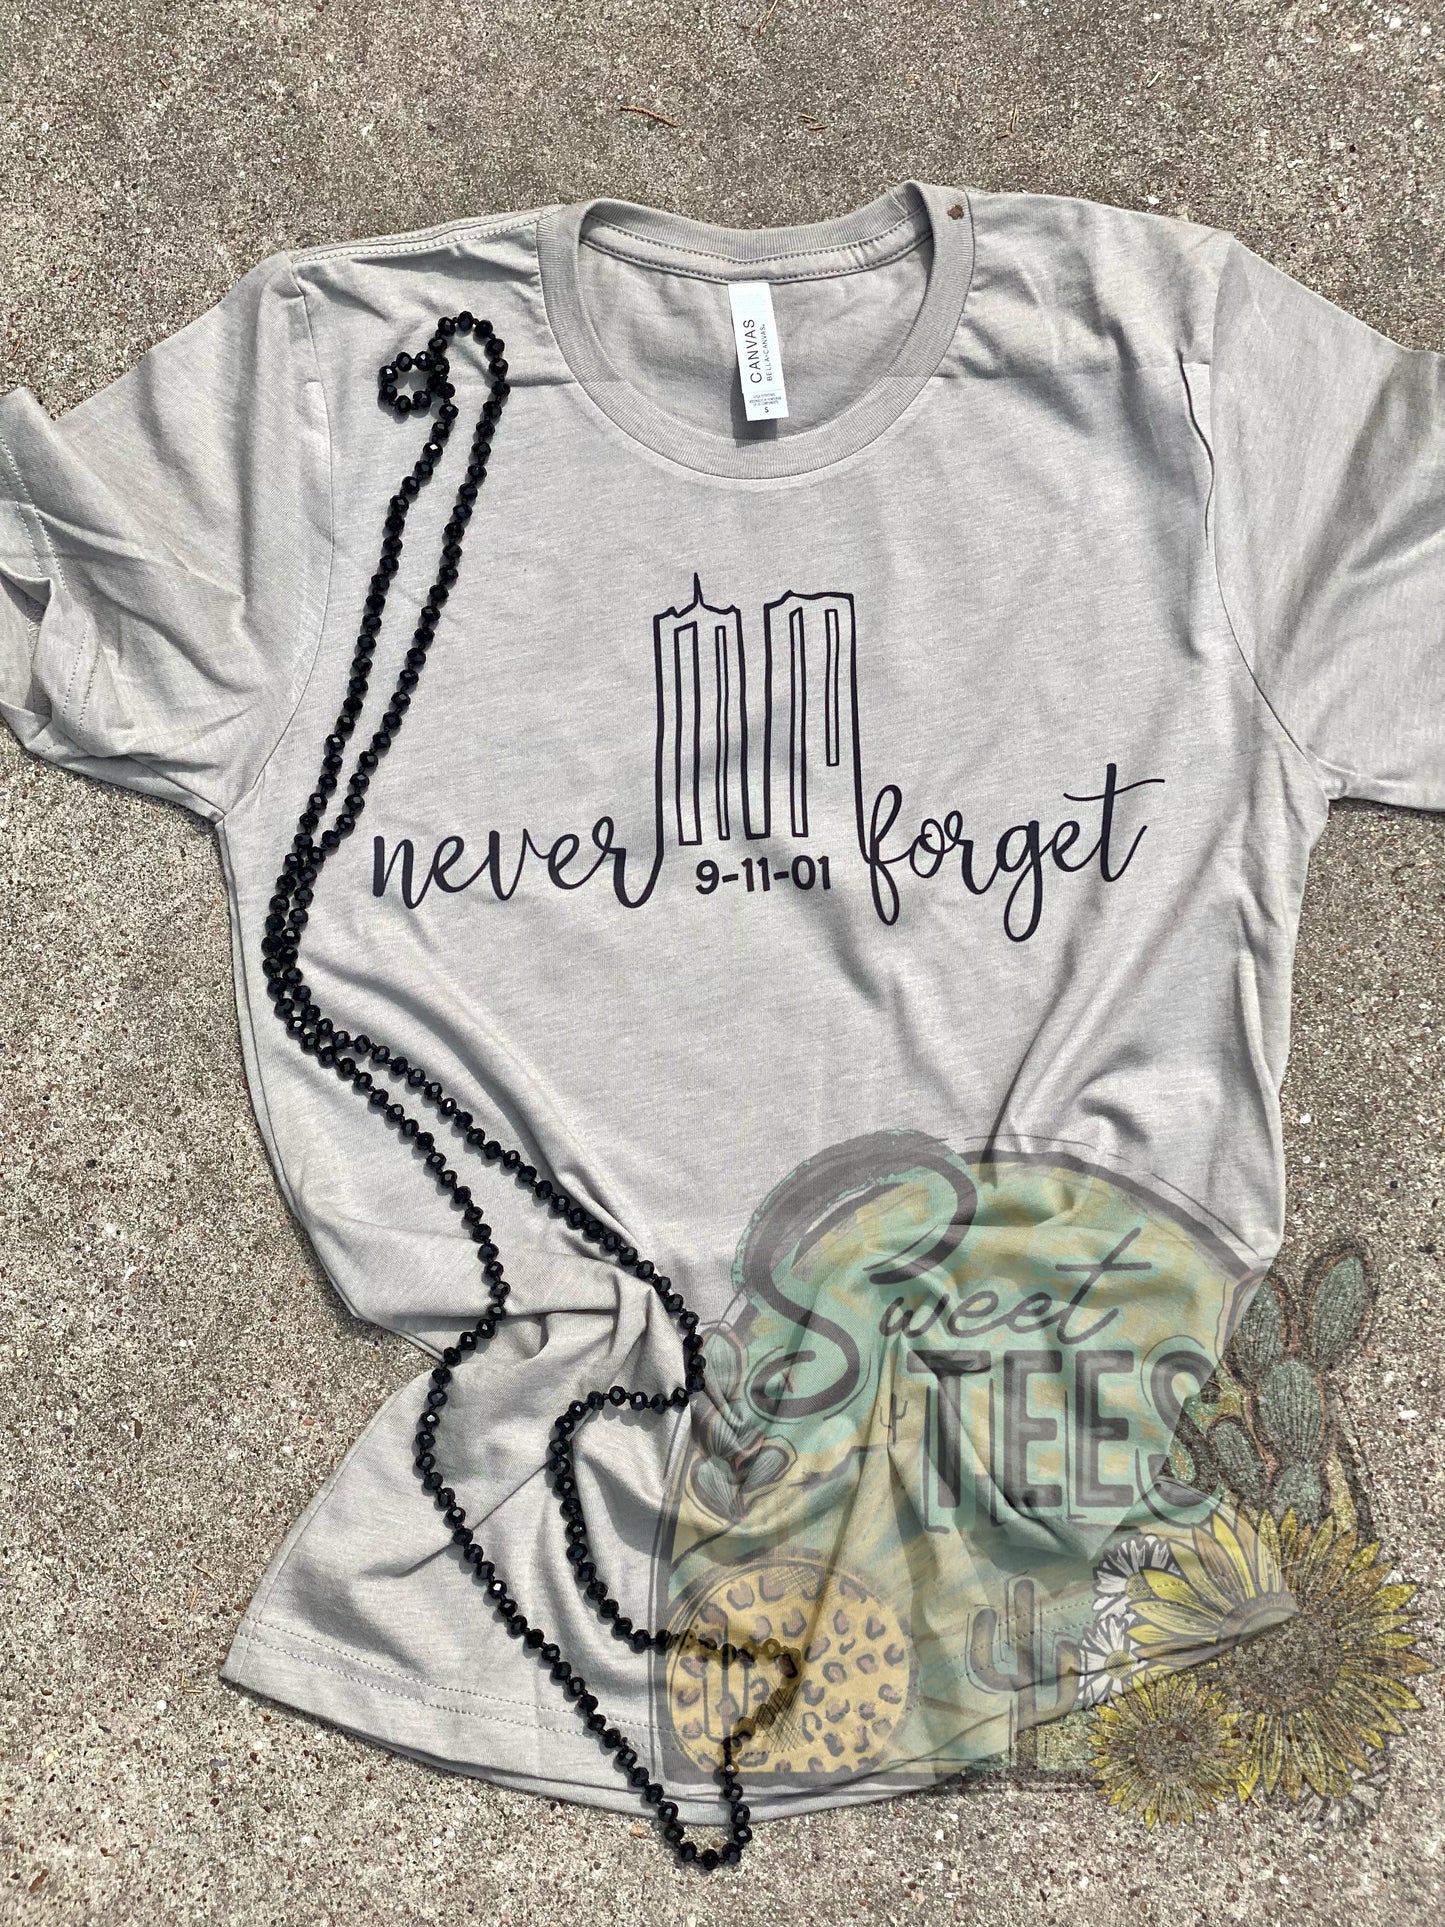 Never Forget 9-11 tee